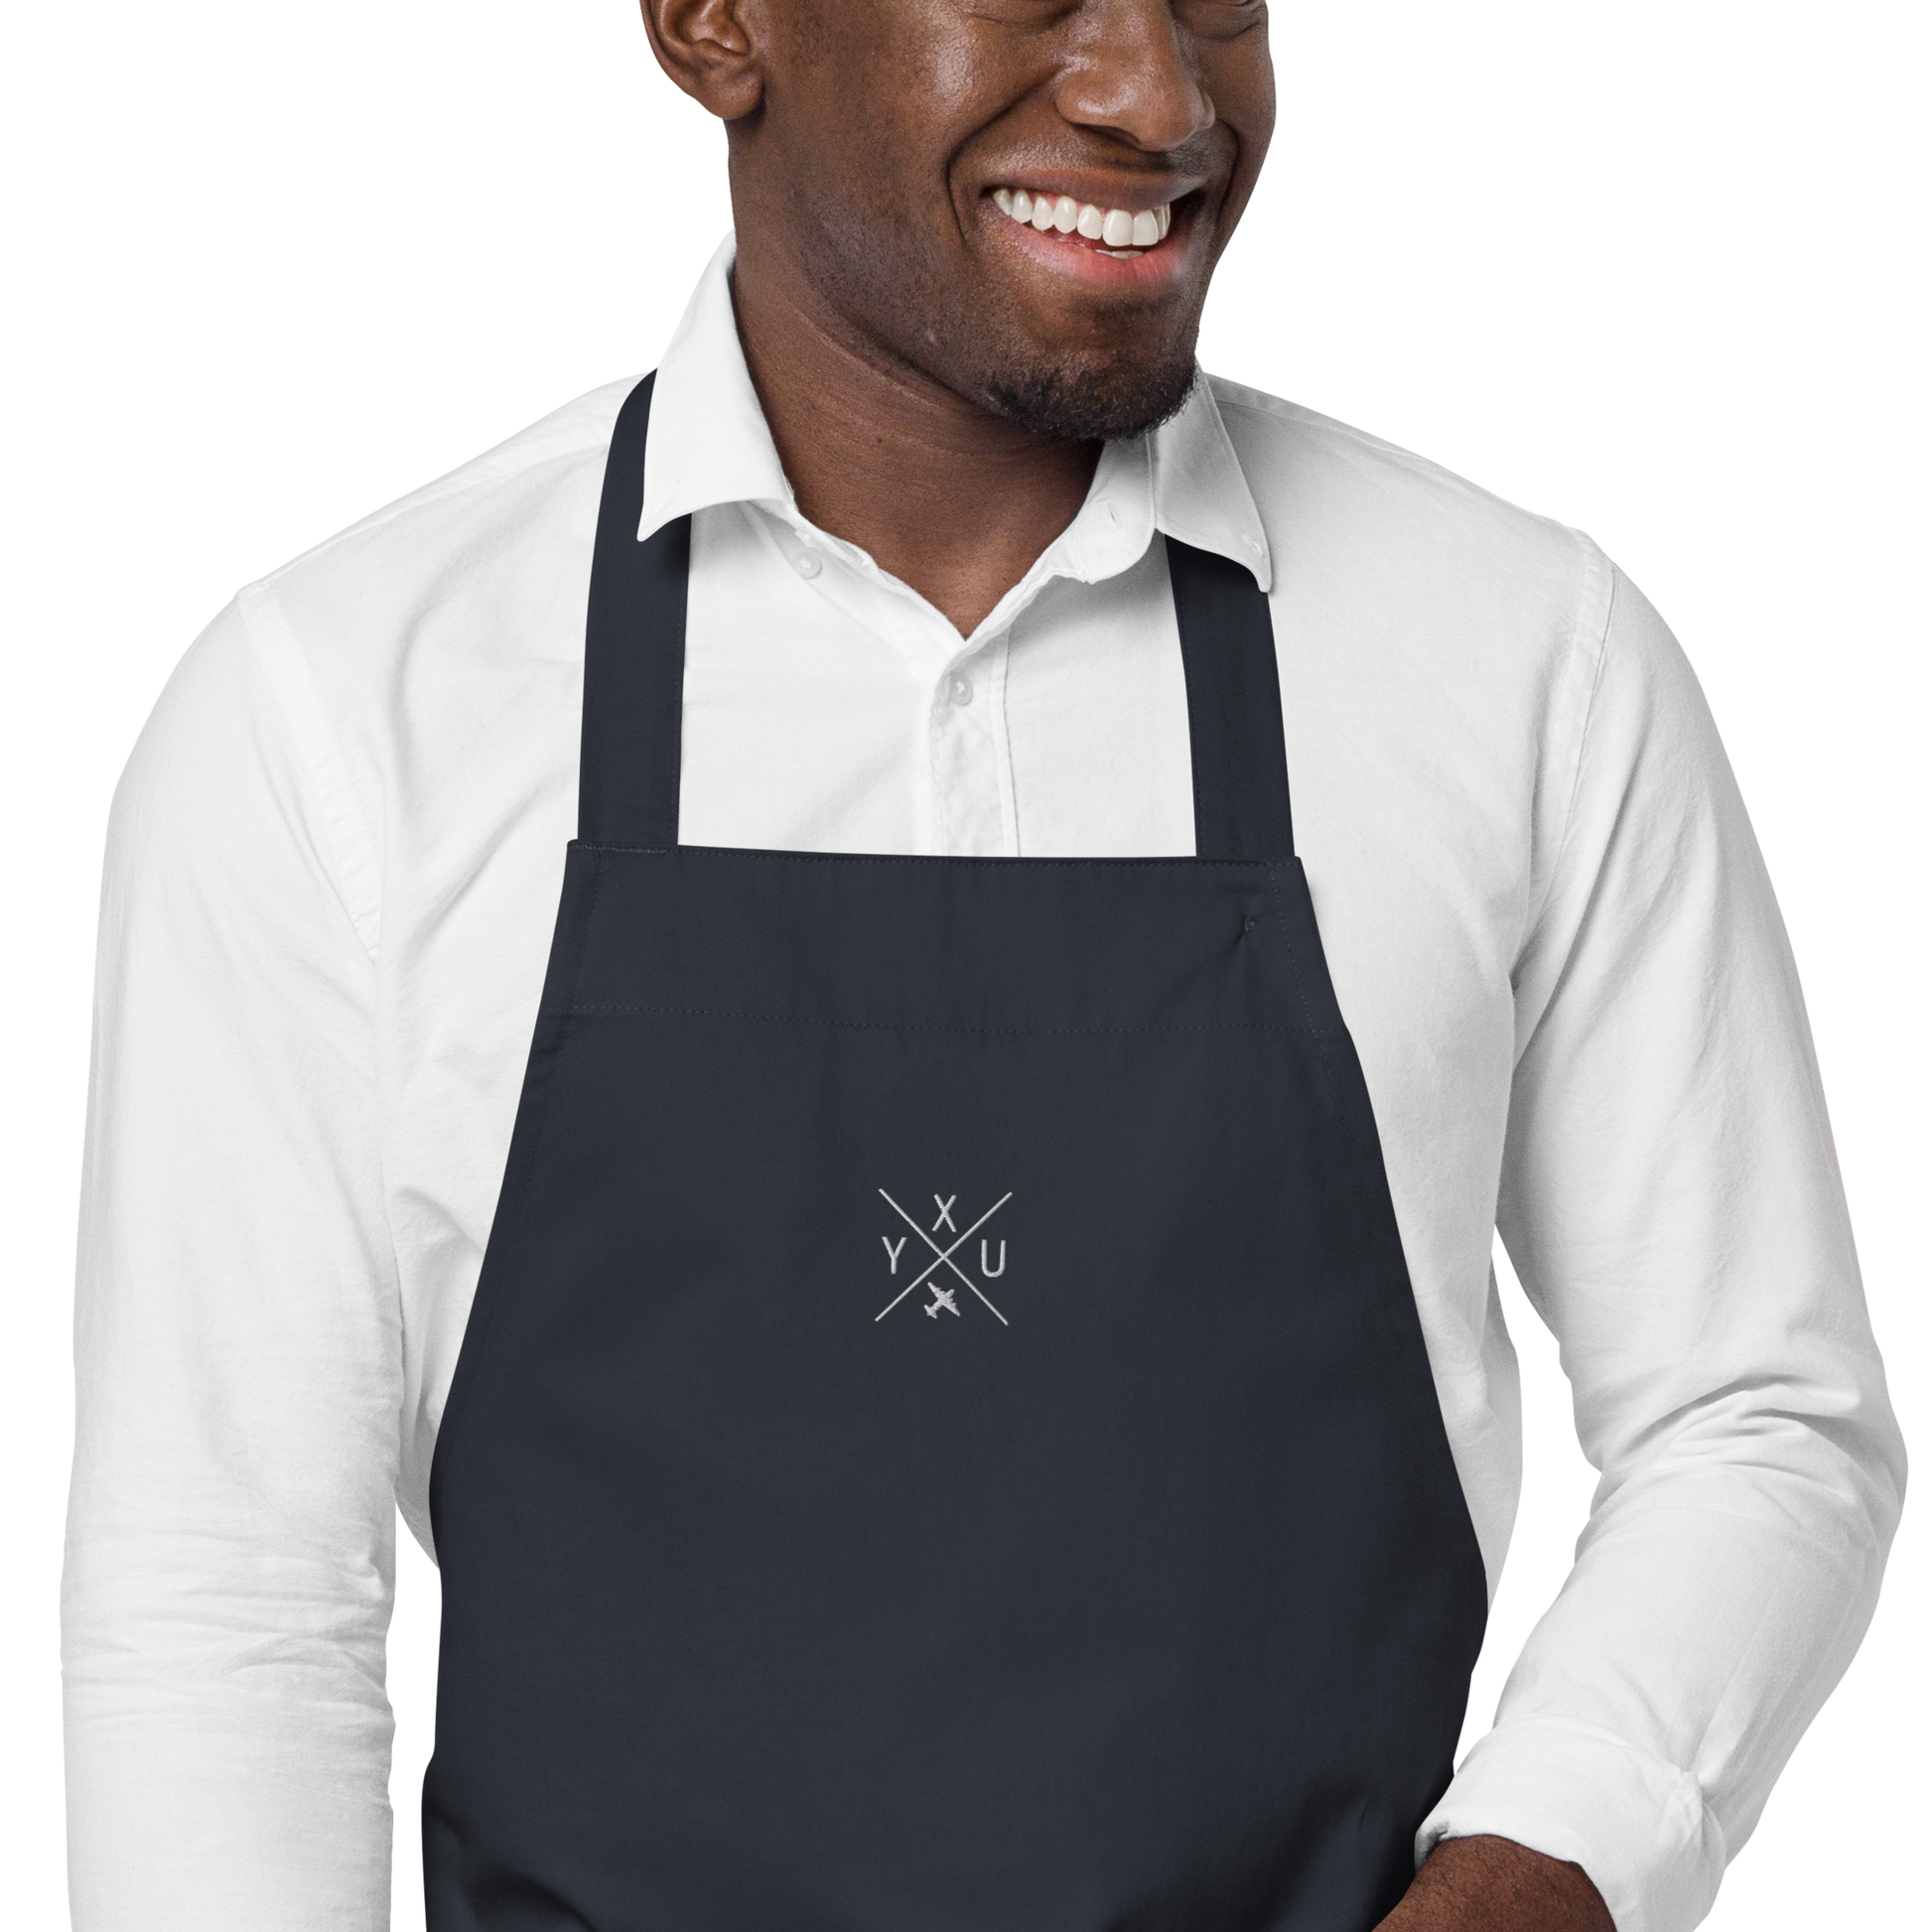 YHM Designs - YXU London Organic Cotton Apron - Crossed-X Design with Airport Code and Vintage Propliner - White Embroidery - Image 10